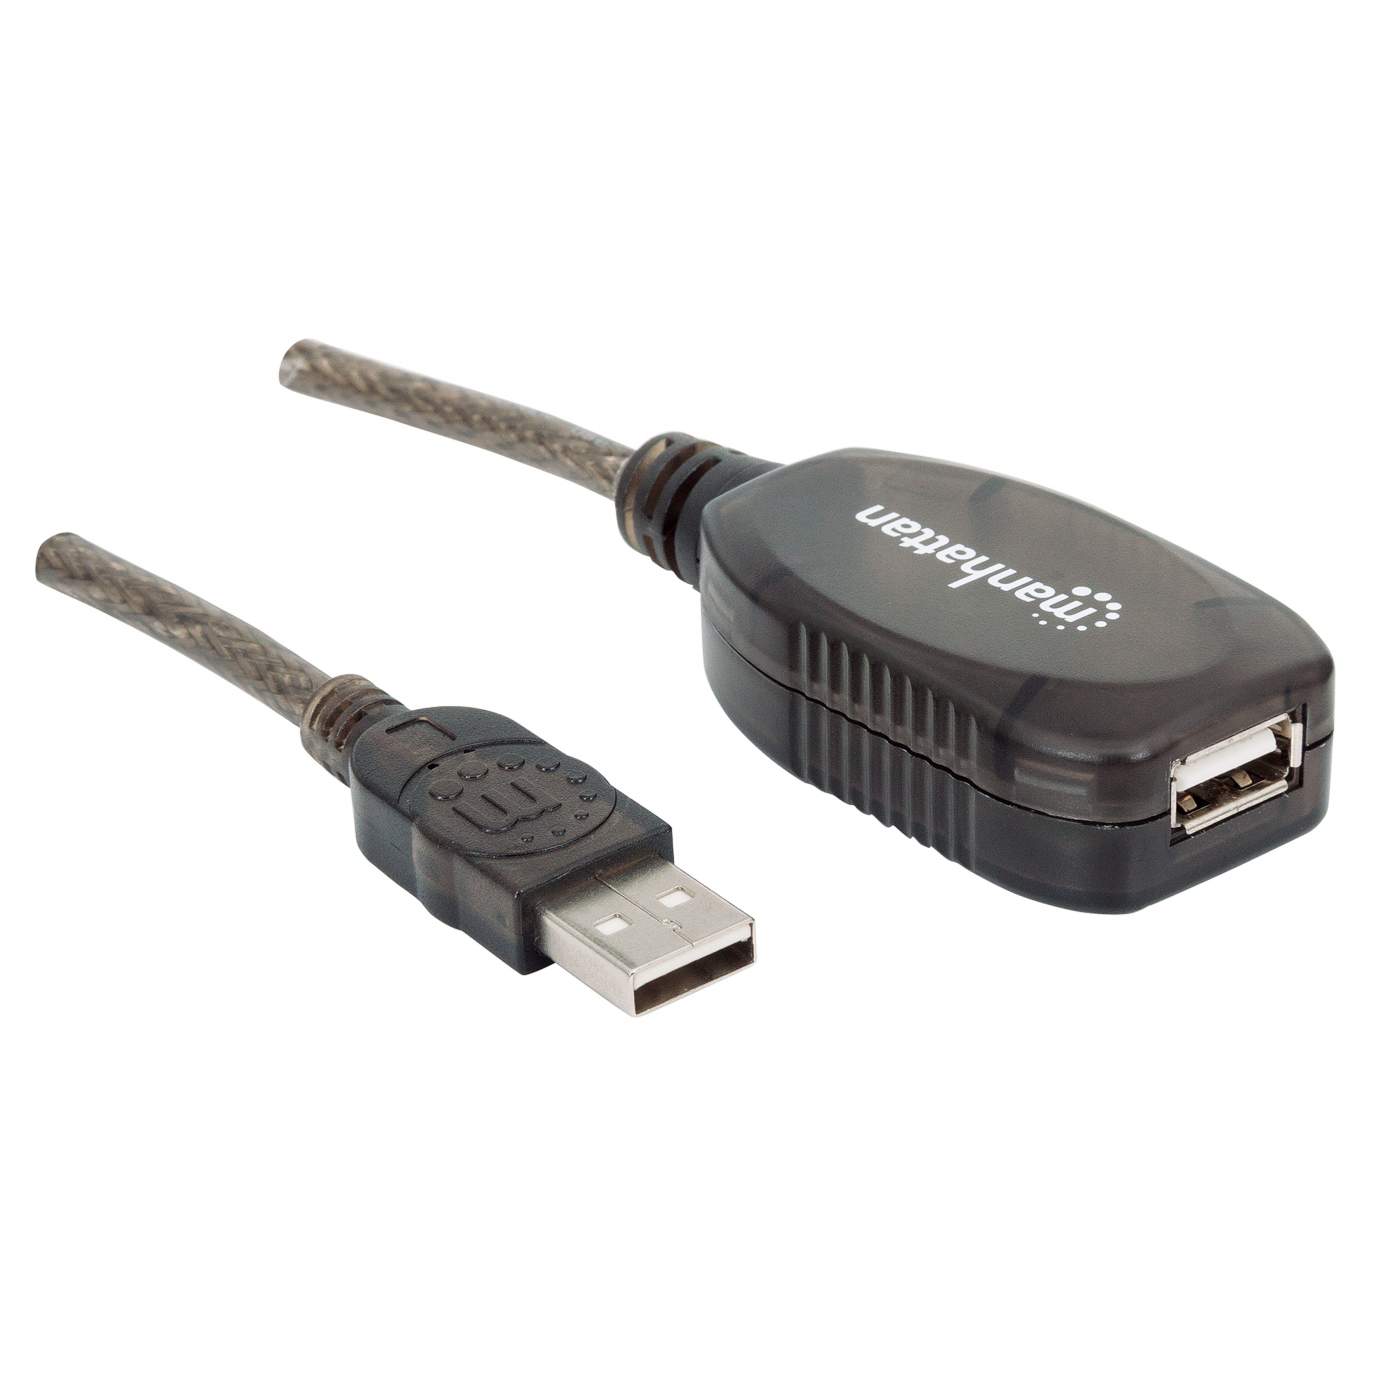 USB 2.0 Active Extension Cable (A M/F), 16 ft.